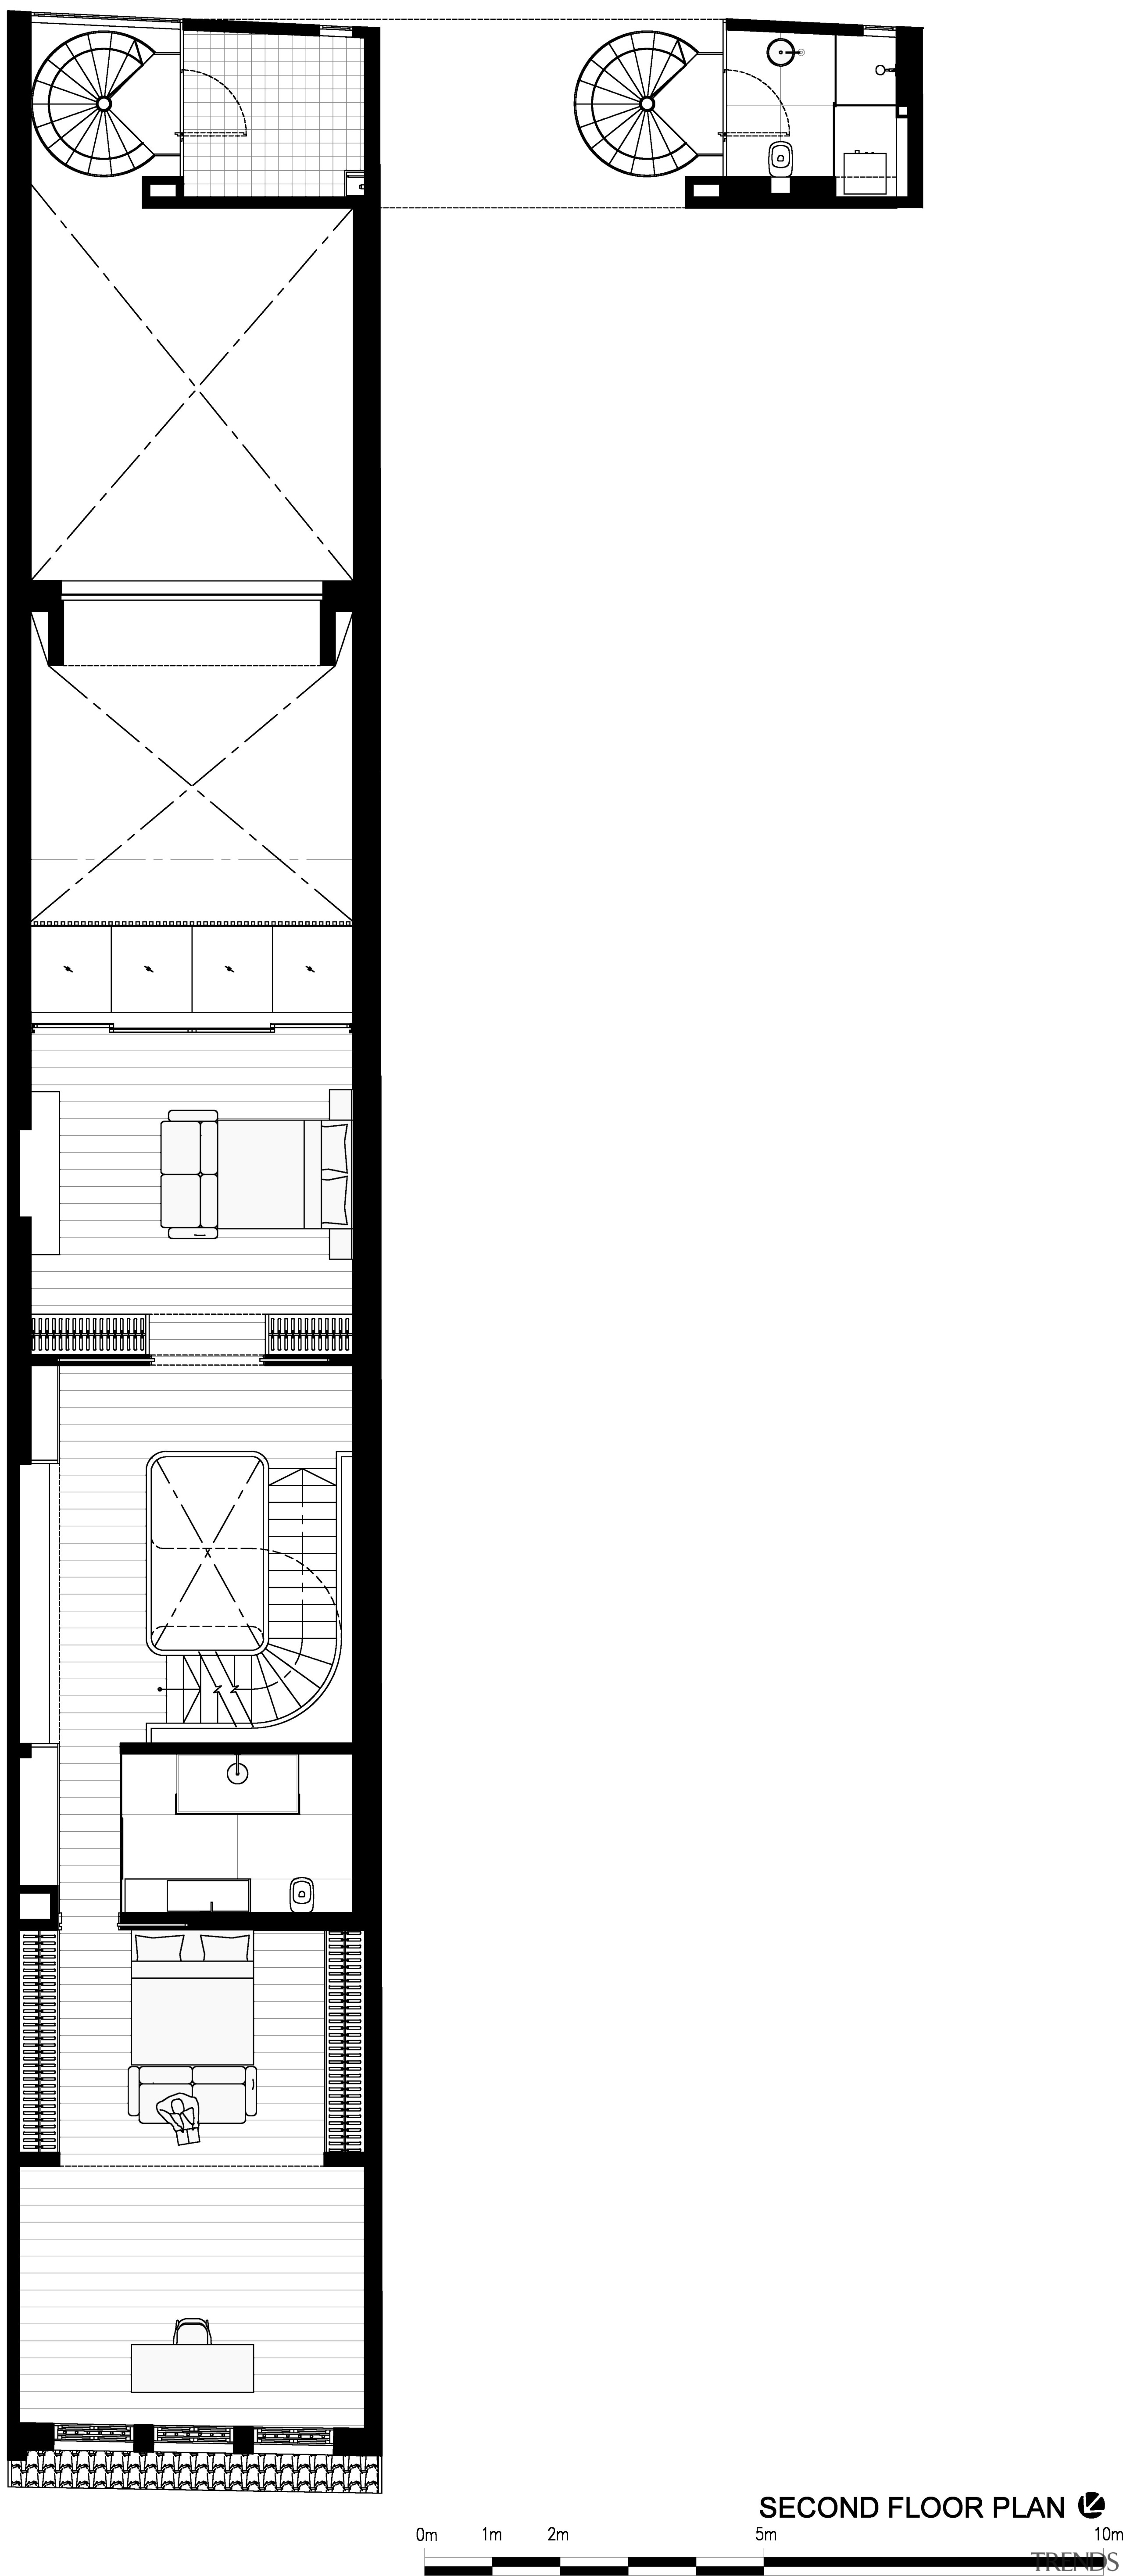 Plan of level two of Singapore shophouse renovation angle, area, black and white, design, drawing, font, line, line art, monochrome, product design, structure, text, white